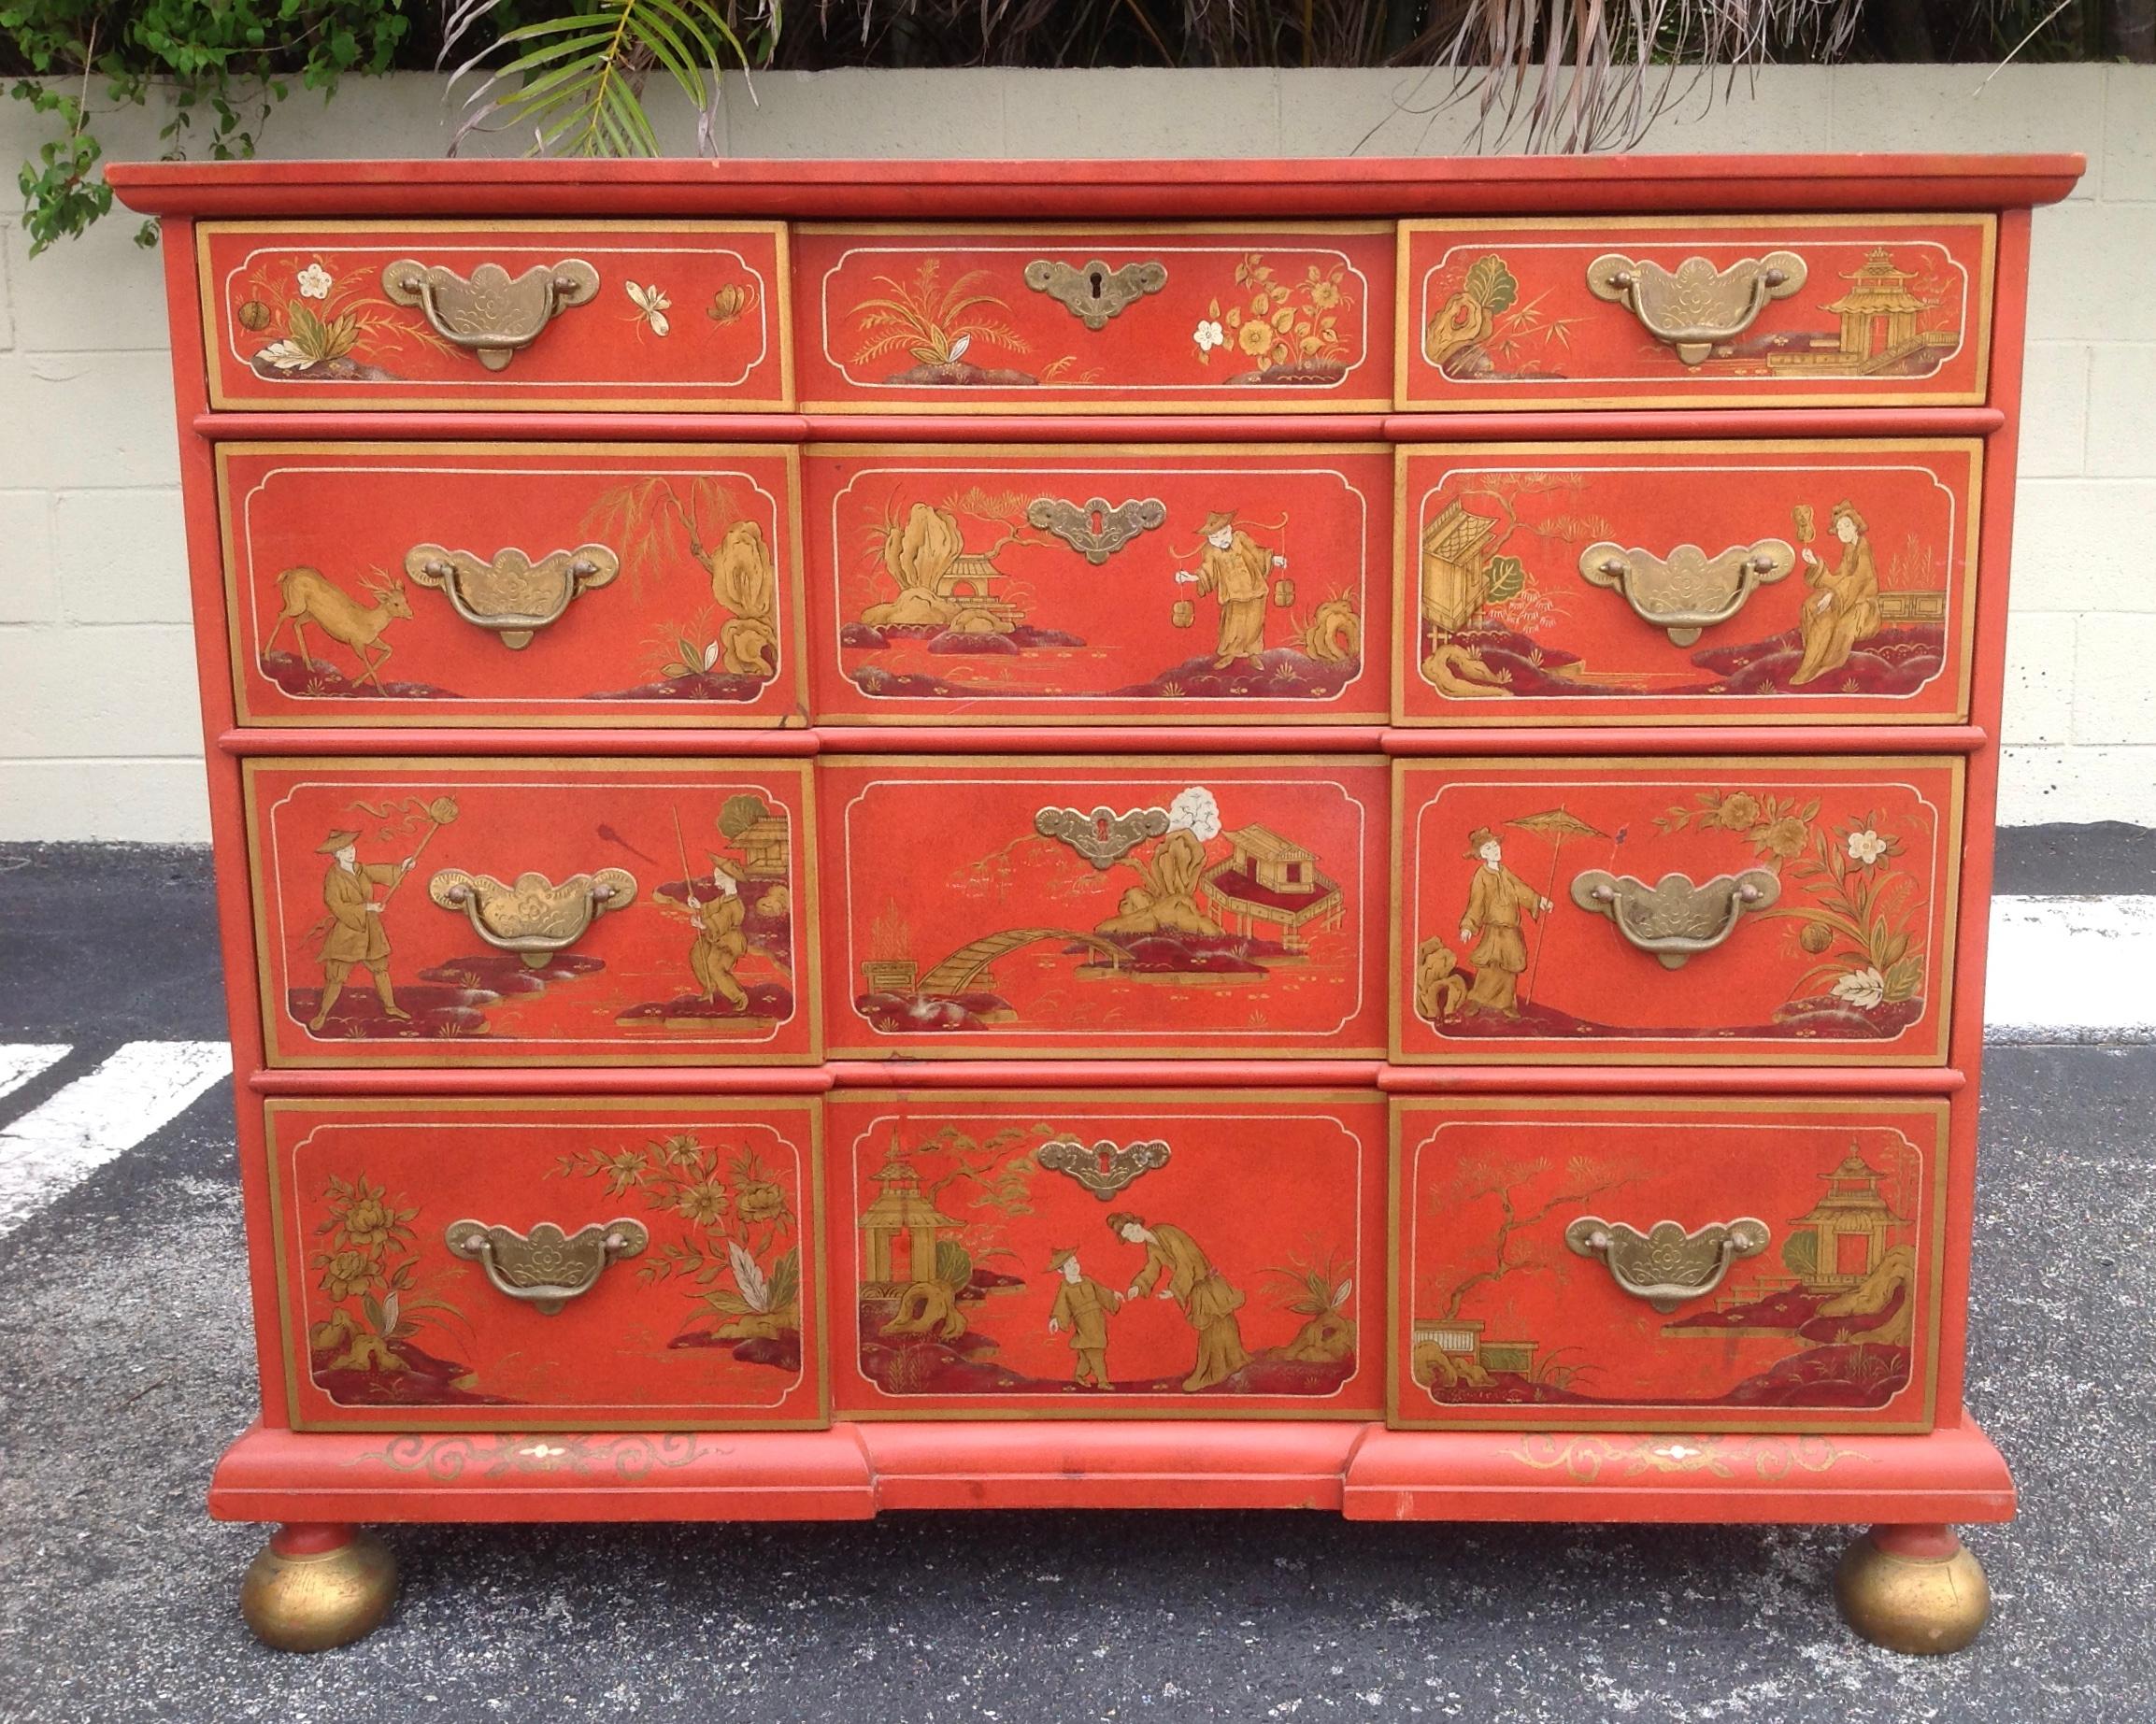 Finely made, with attention to detail - in the 18th century style.
Beautiful Chinese red background adorned with a profusion
of figures on three sides.